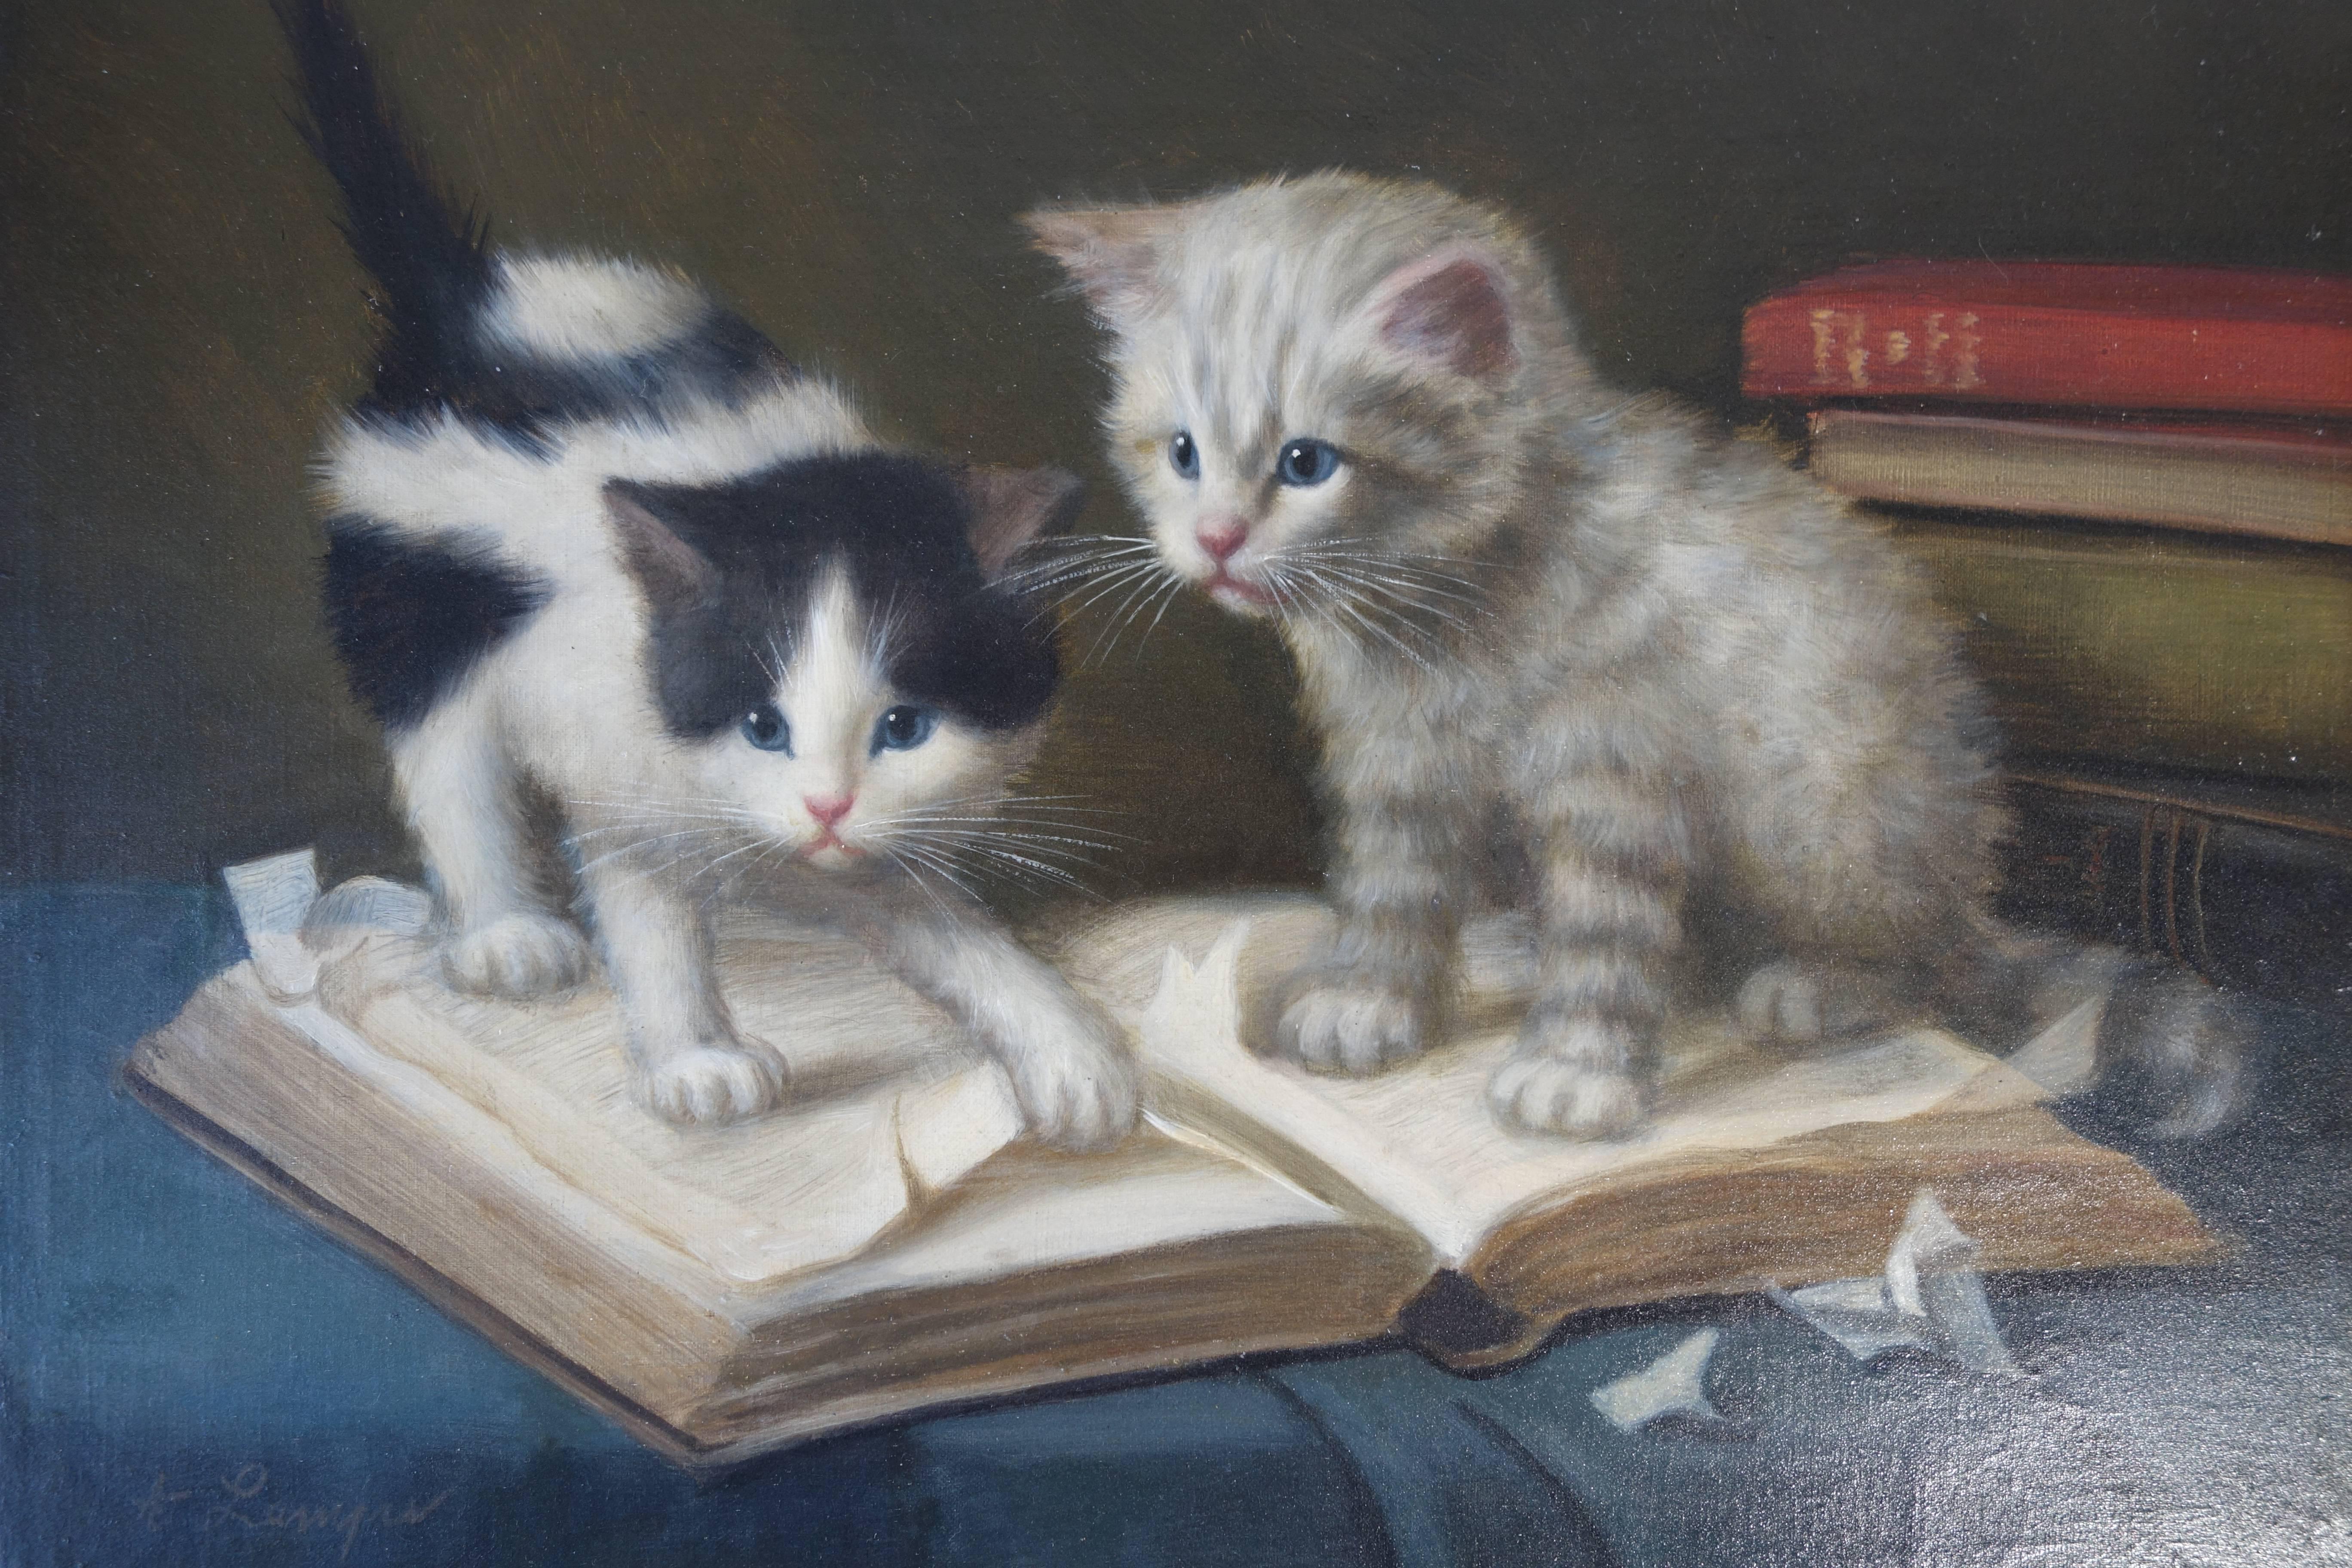 Oil painting by Amanda Lampe (xx) with two cats playing with a book.
Signed: A. Lampe
Dimensions: 59.5 x 49 cm. / 23.43 x 19.29 in.